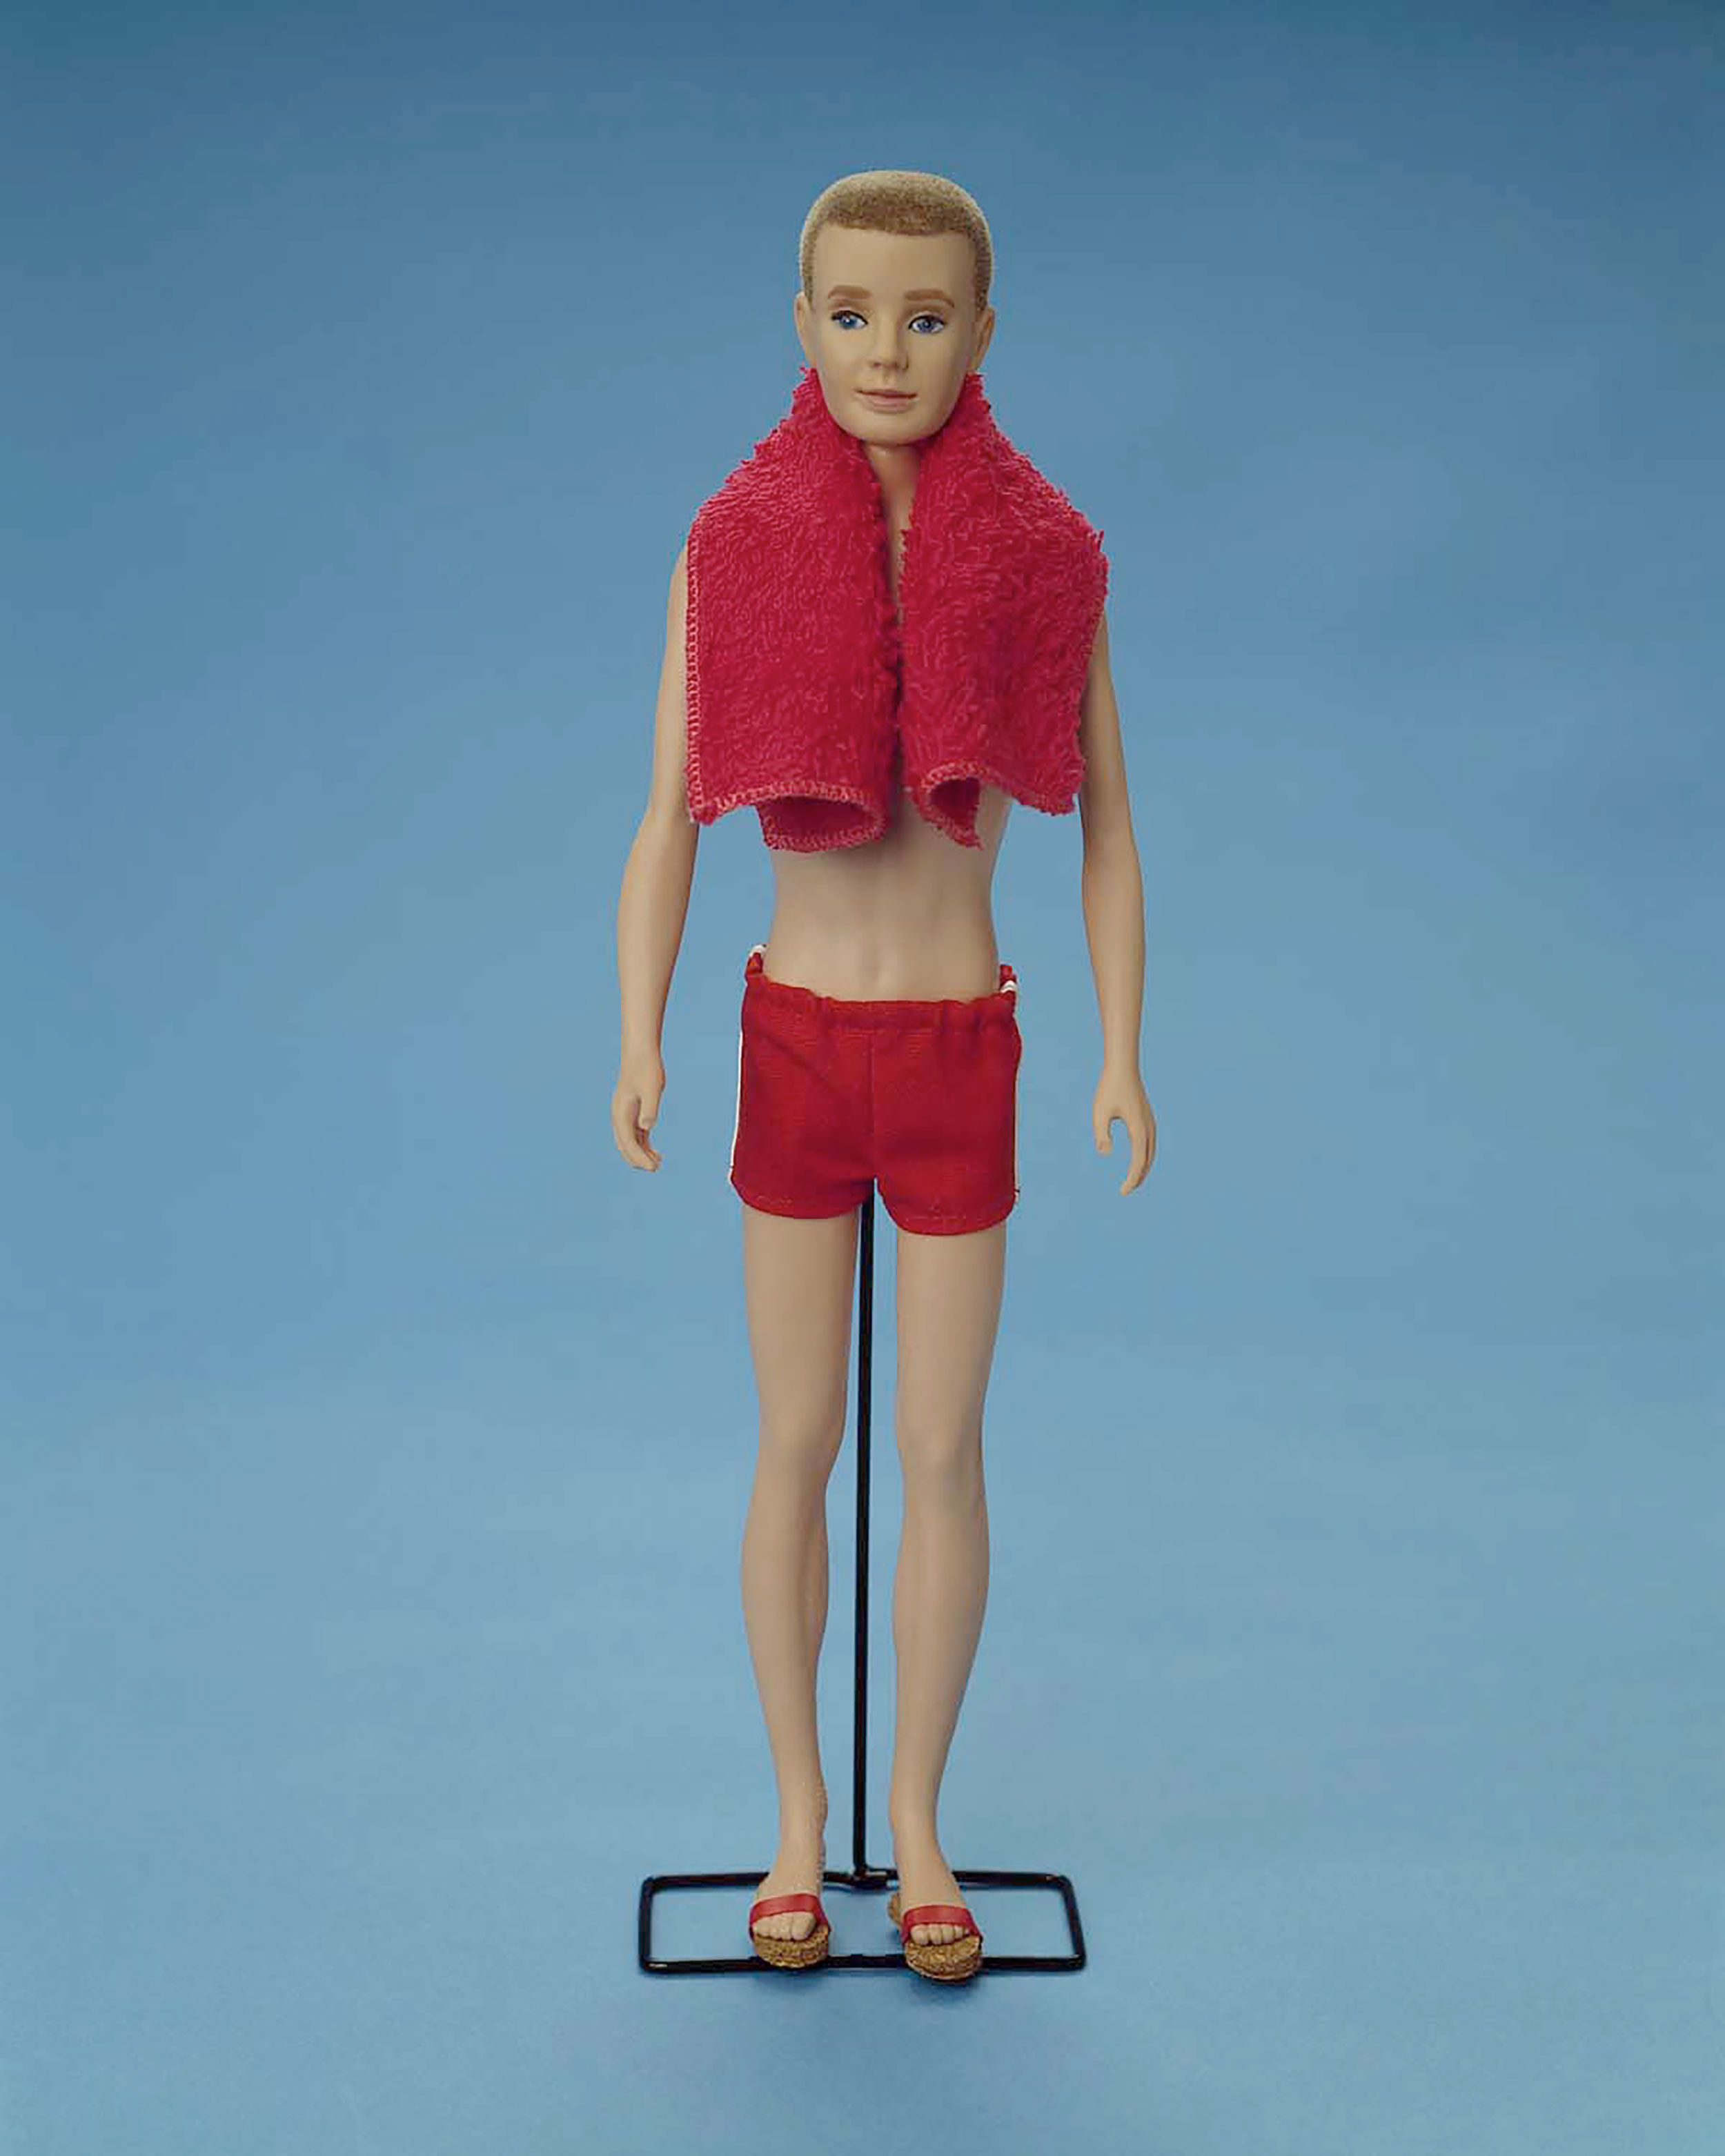 386688 07: (FILE PHOTO) A 1961 Original Ken doll wears a bathing suit and a towel in this studio portrait. On March 13, 2001, Mattel toy company celebrated the 40th anniversary of the Ken doll which was originally introduced March 13, 1961 at the American International Toy Fair. Originating with his crew cut look and evolving through the funky disco styles of the ''70s and ''80s, to the trendy styles of the ''90s, Ken has been a worldwide pop culture favorite for every era and for several generations. (Photo courtesy of Mattel/Newsmakers)